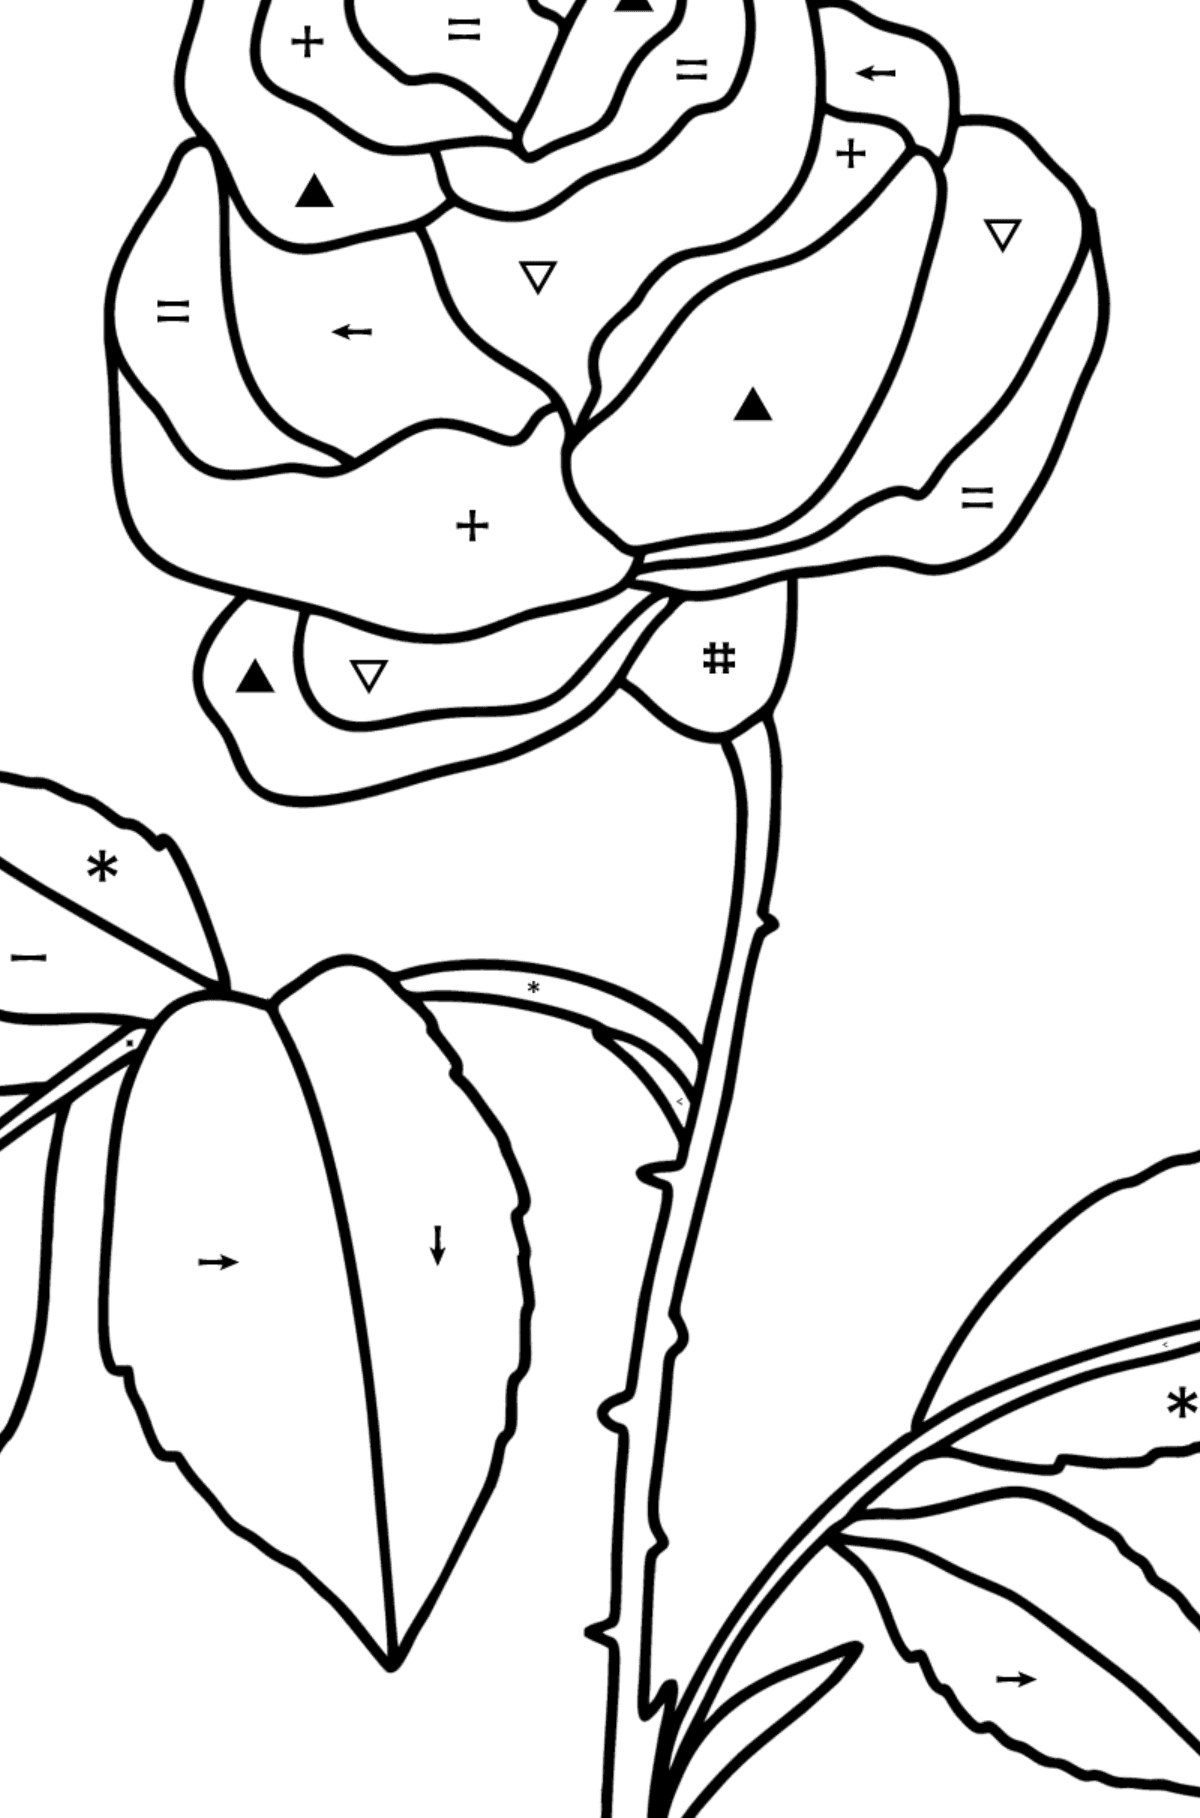 Red rose coloring page - Coloring by Symbols for Kids